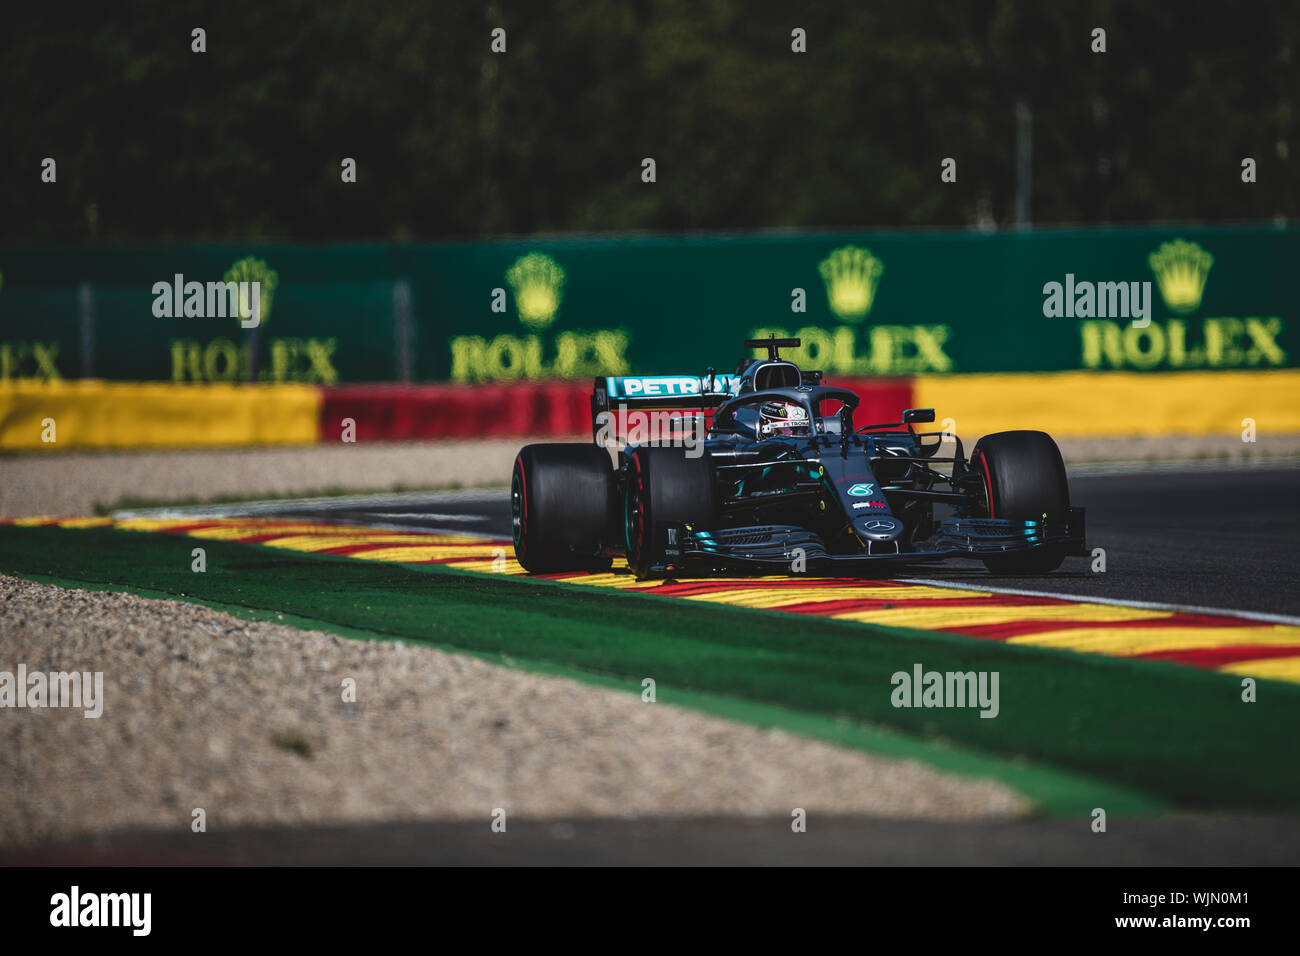 #44, Lewis Hamilton, GBR, Mercedes, in action during the Belgian Grand Prix at Spa Francorchamps Stock Photo